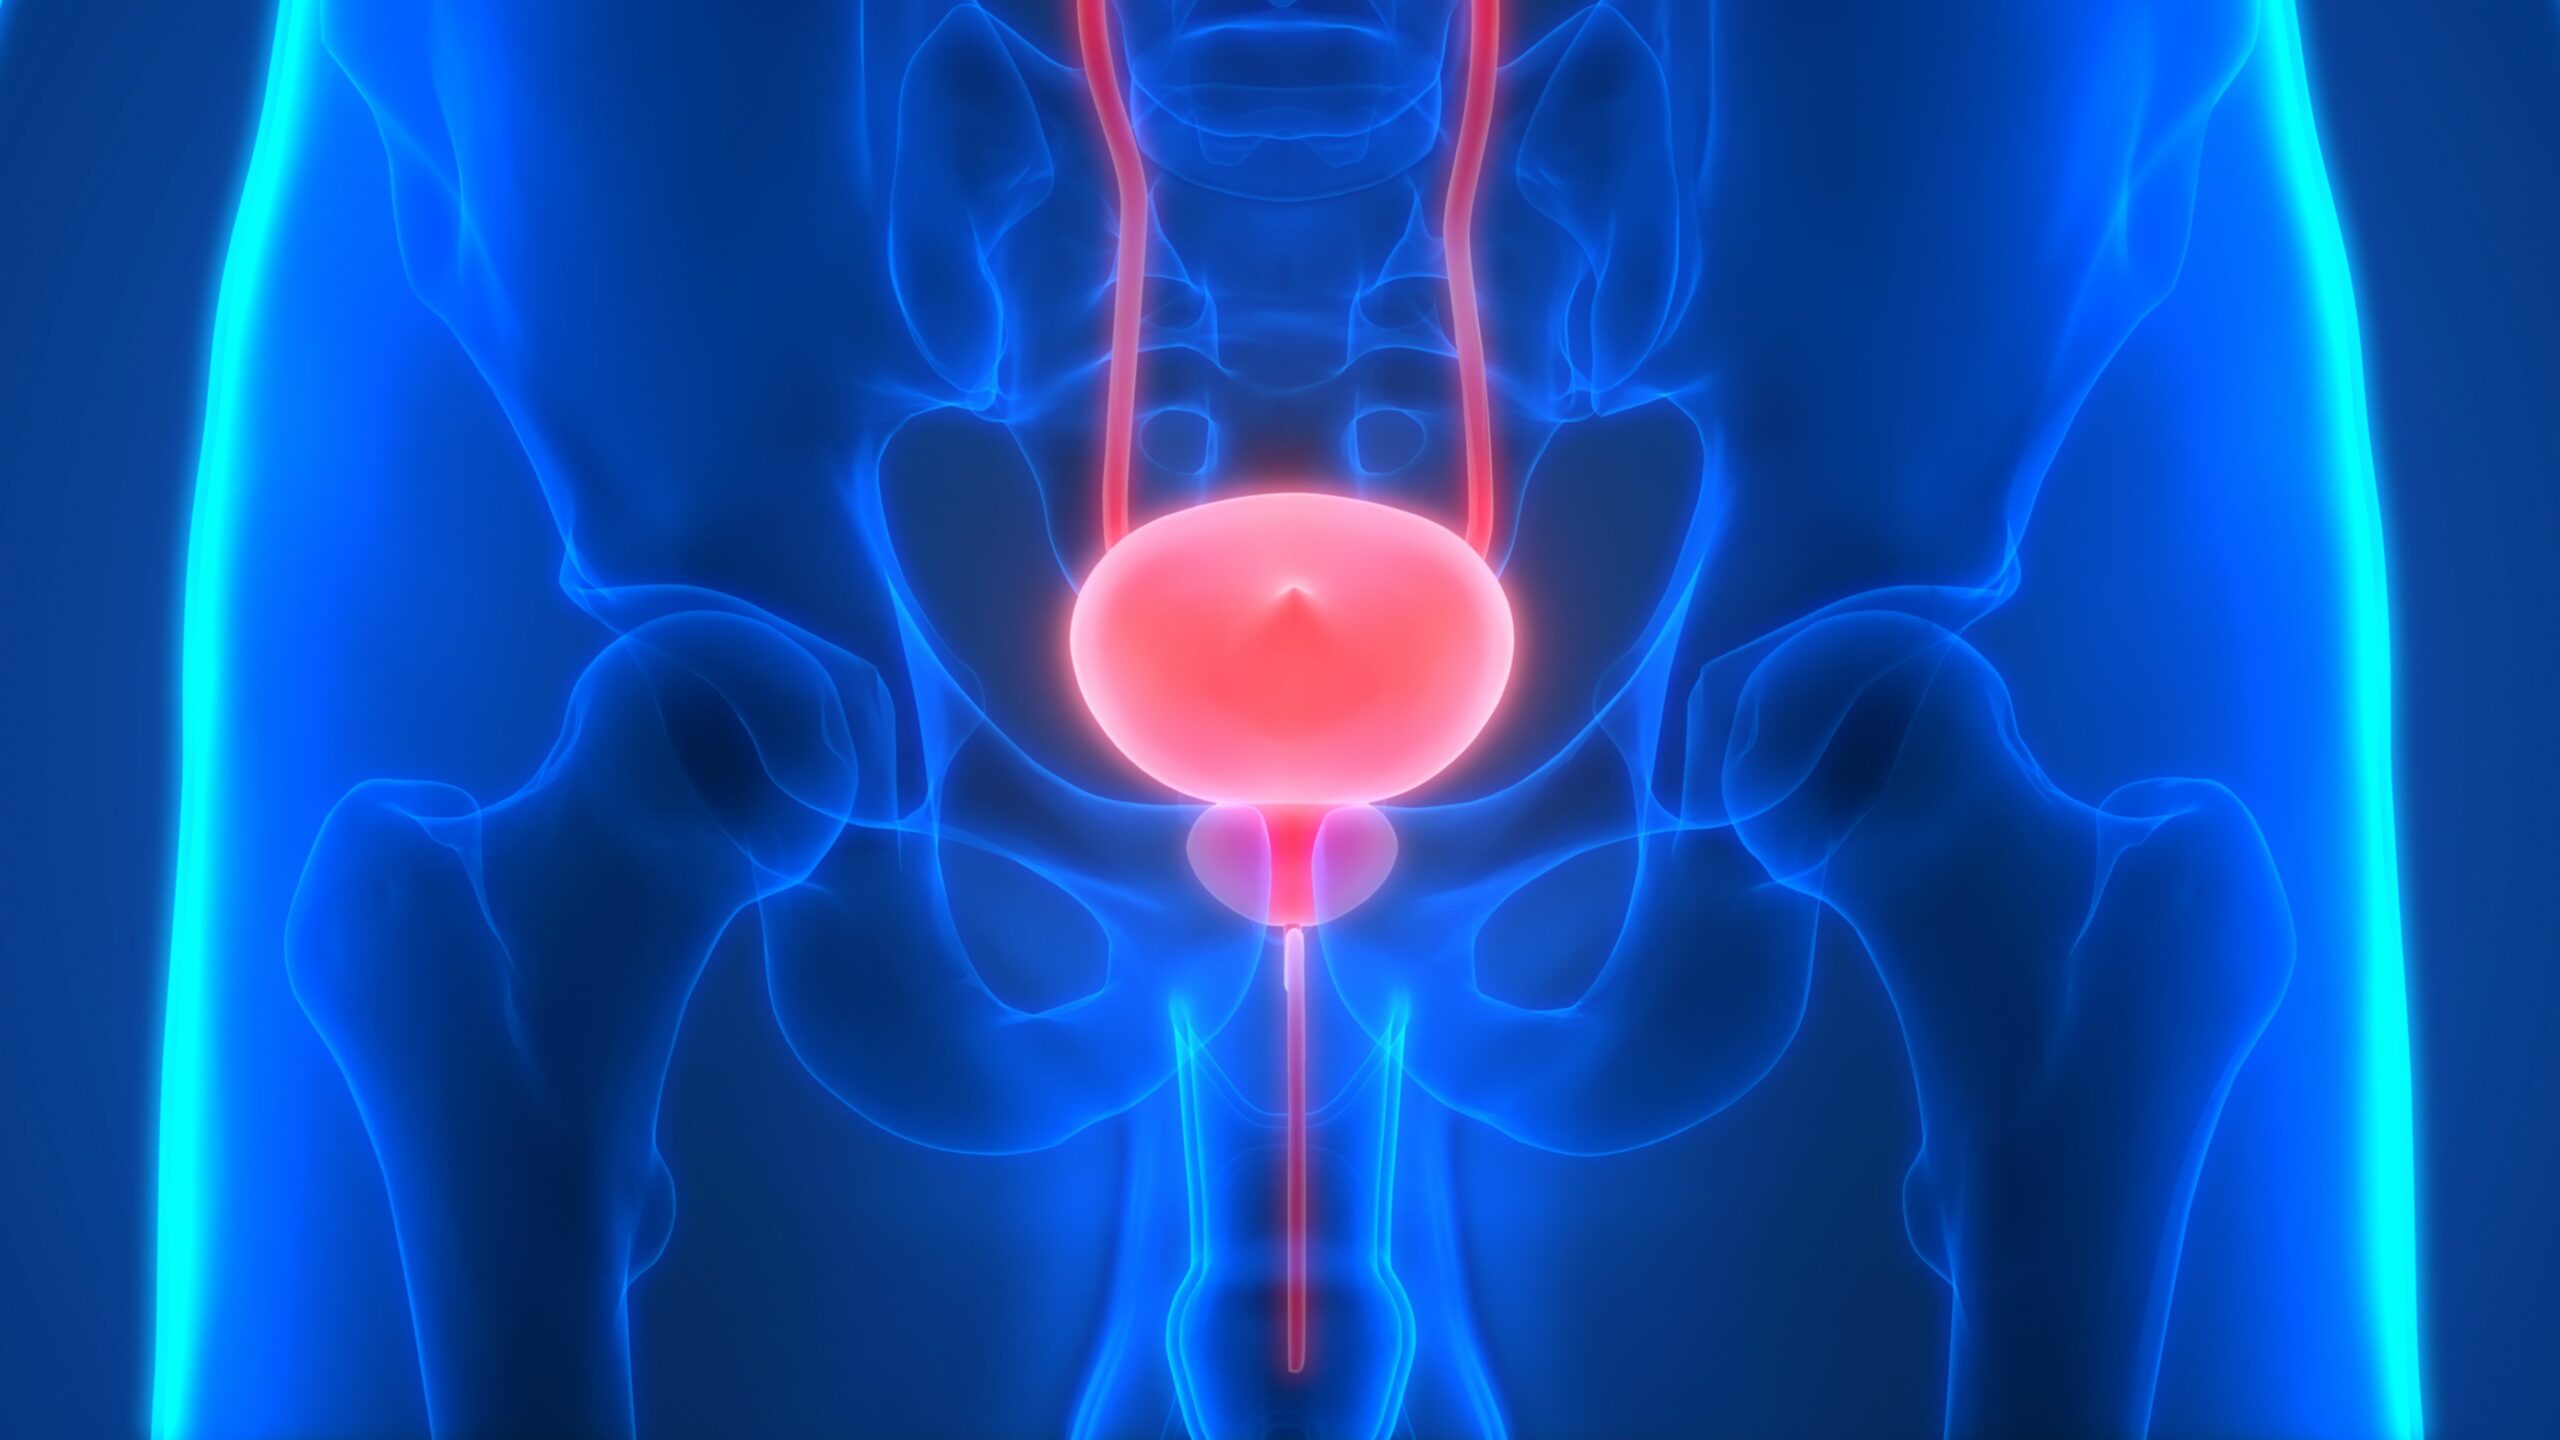 Novel Therapy Achieves Durable Complete Response Rate Treating High-Risk Bladder Cancer in Phase II Trial